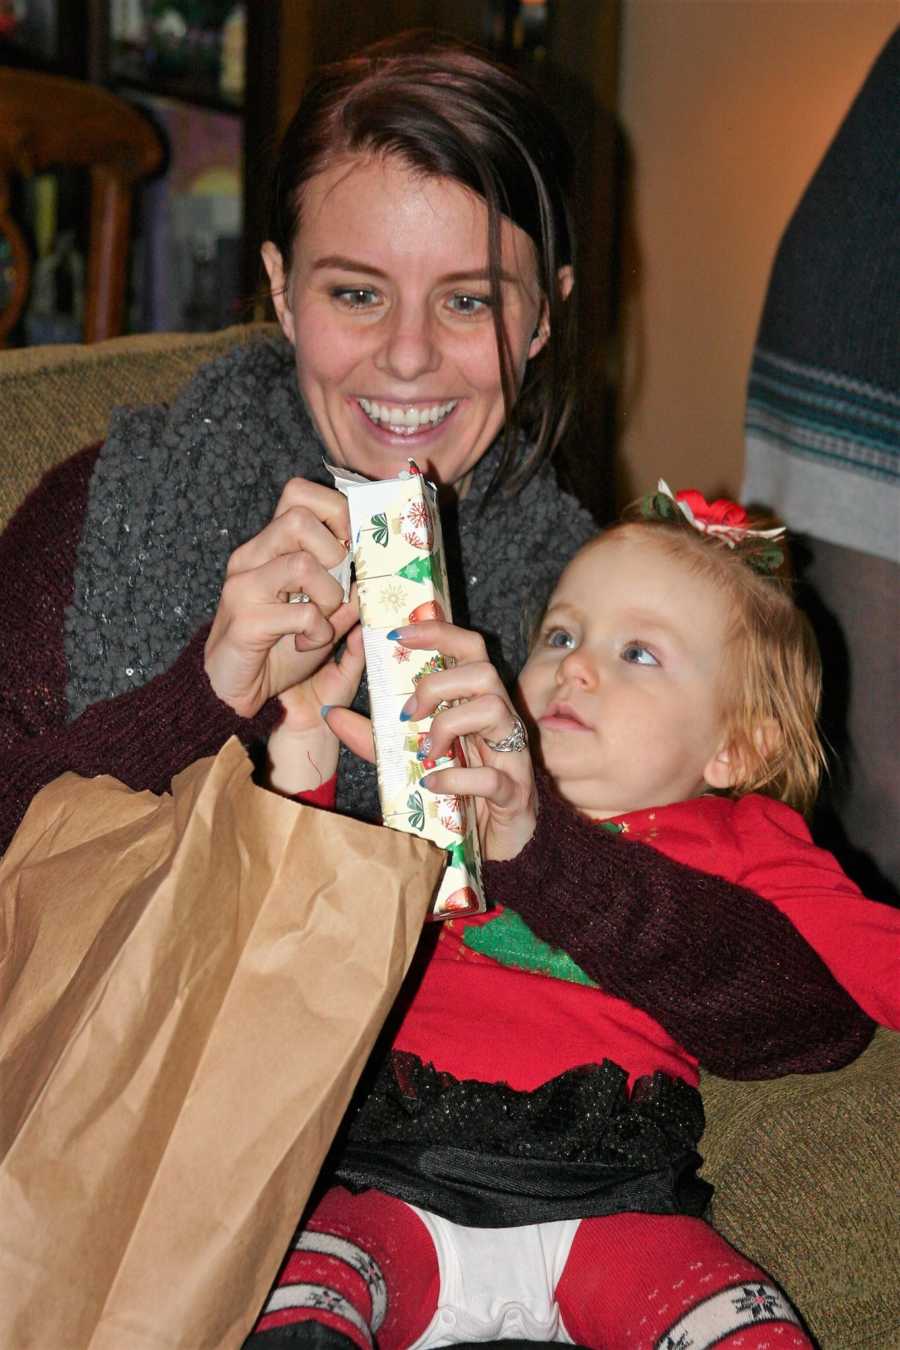 Woman smiles while sitting with baby on her lap as she opens present